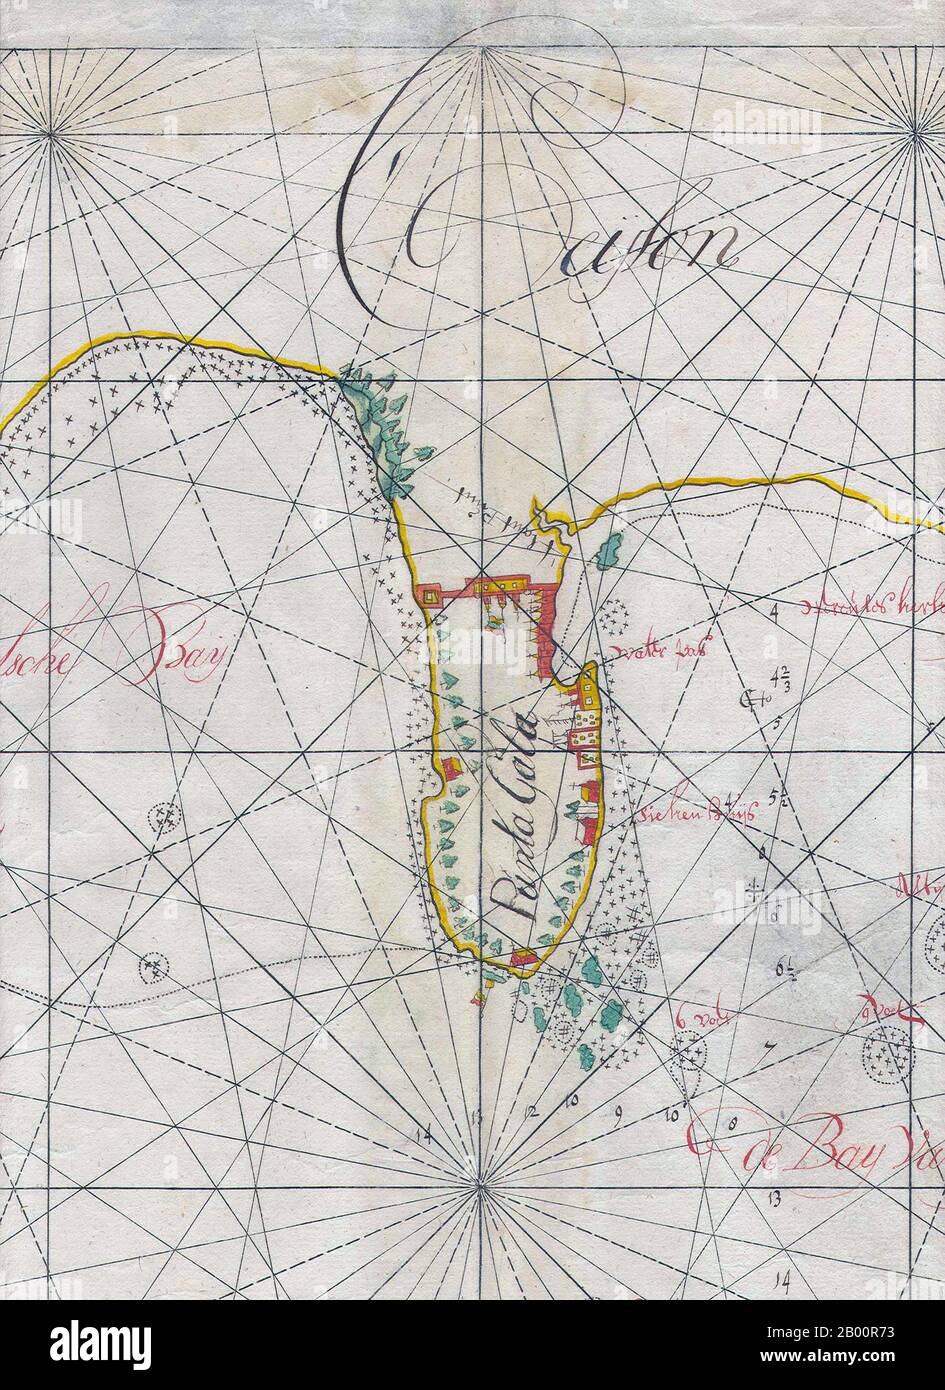 Sri Lanka: 17th century Dutch East India Company manuscript map of Galle (detail).  The Dutch East India Company (VOC) was set up in 1602 to gain a foothold in the East Indies (Indonesia) for the Dutch in the lucrative spice trade, which until that point was dominated by the Portuguese. It was a chartered company granted a monopoly by the Dutch government to carry out colonial activities in Asia, including establishing colonies in Ceylon (Sri Lanka) and India. Stock Photo